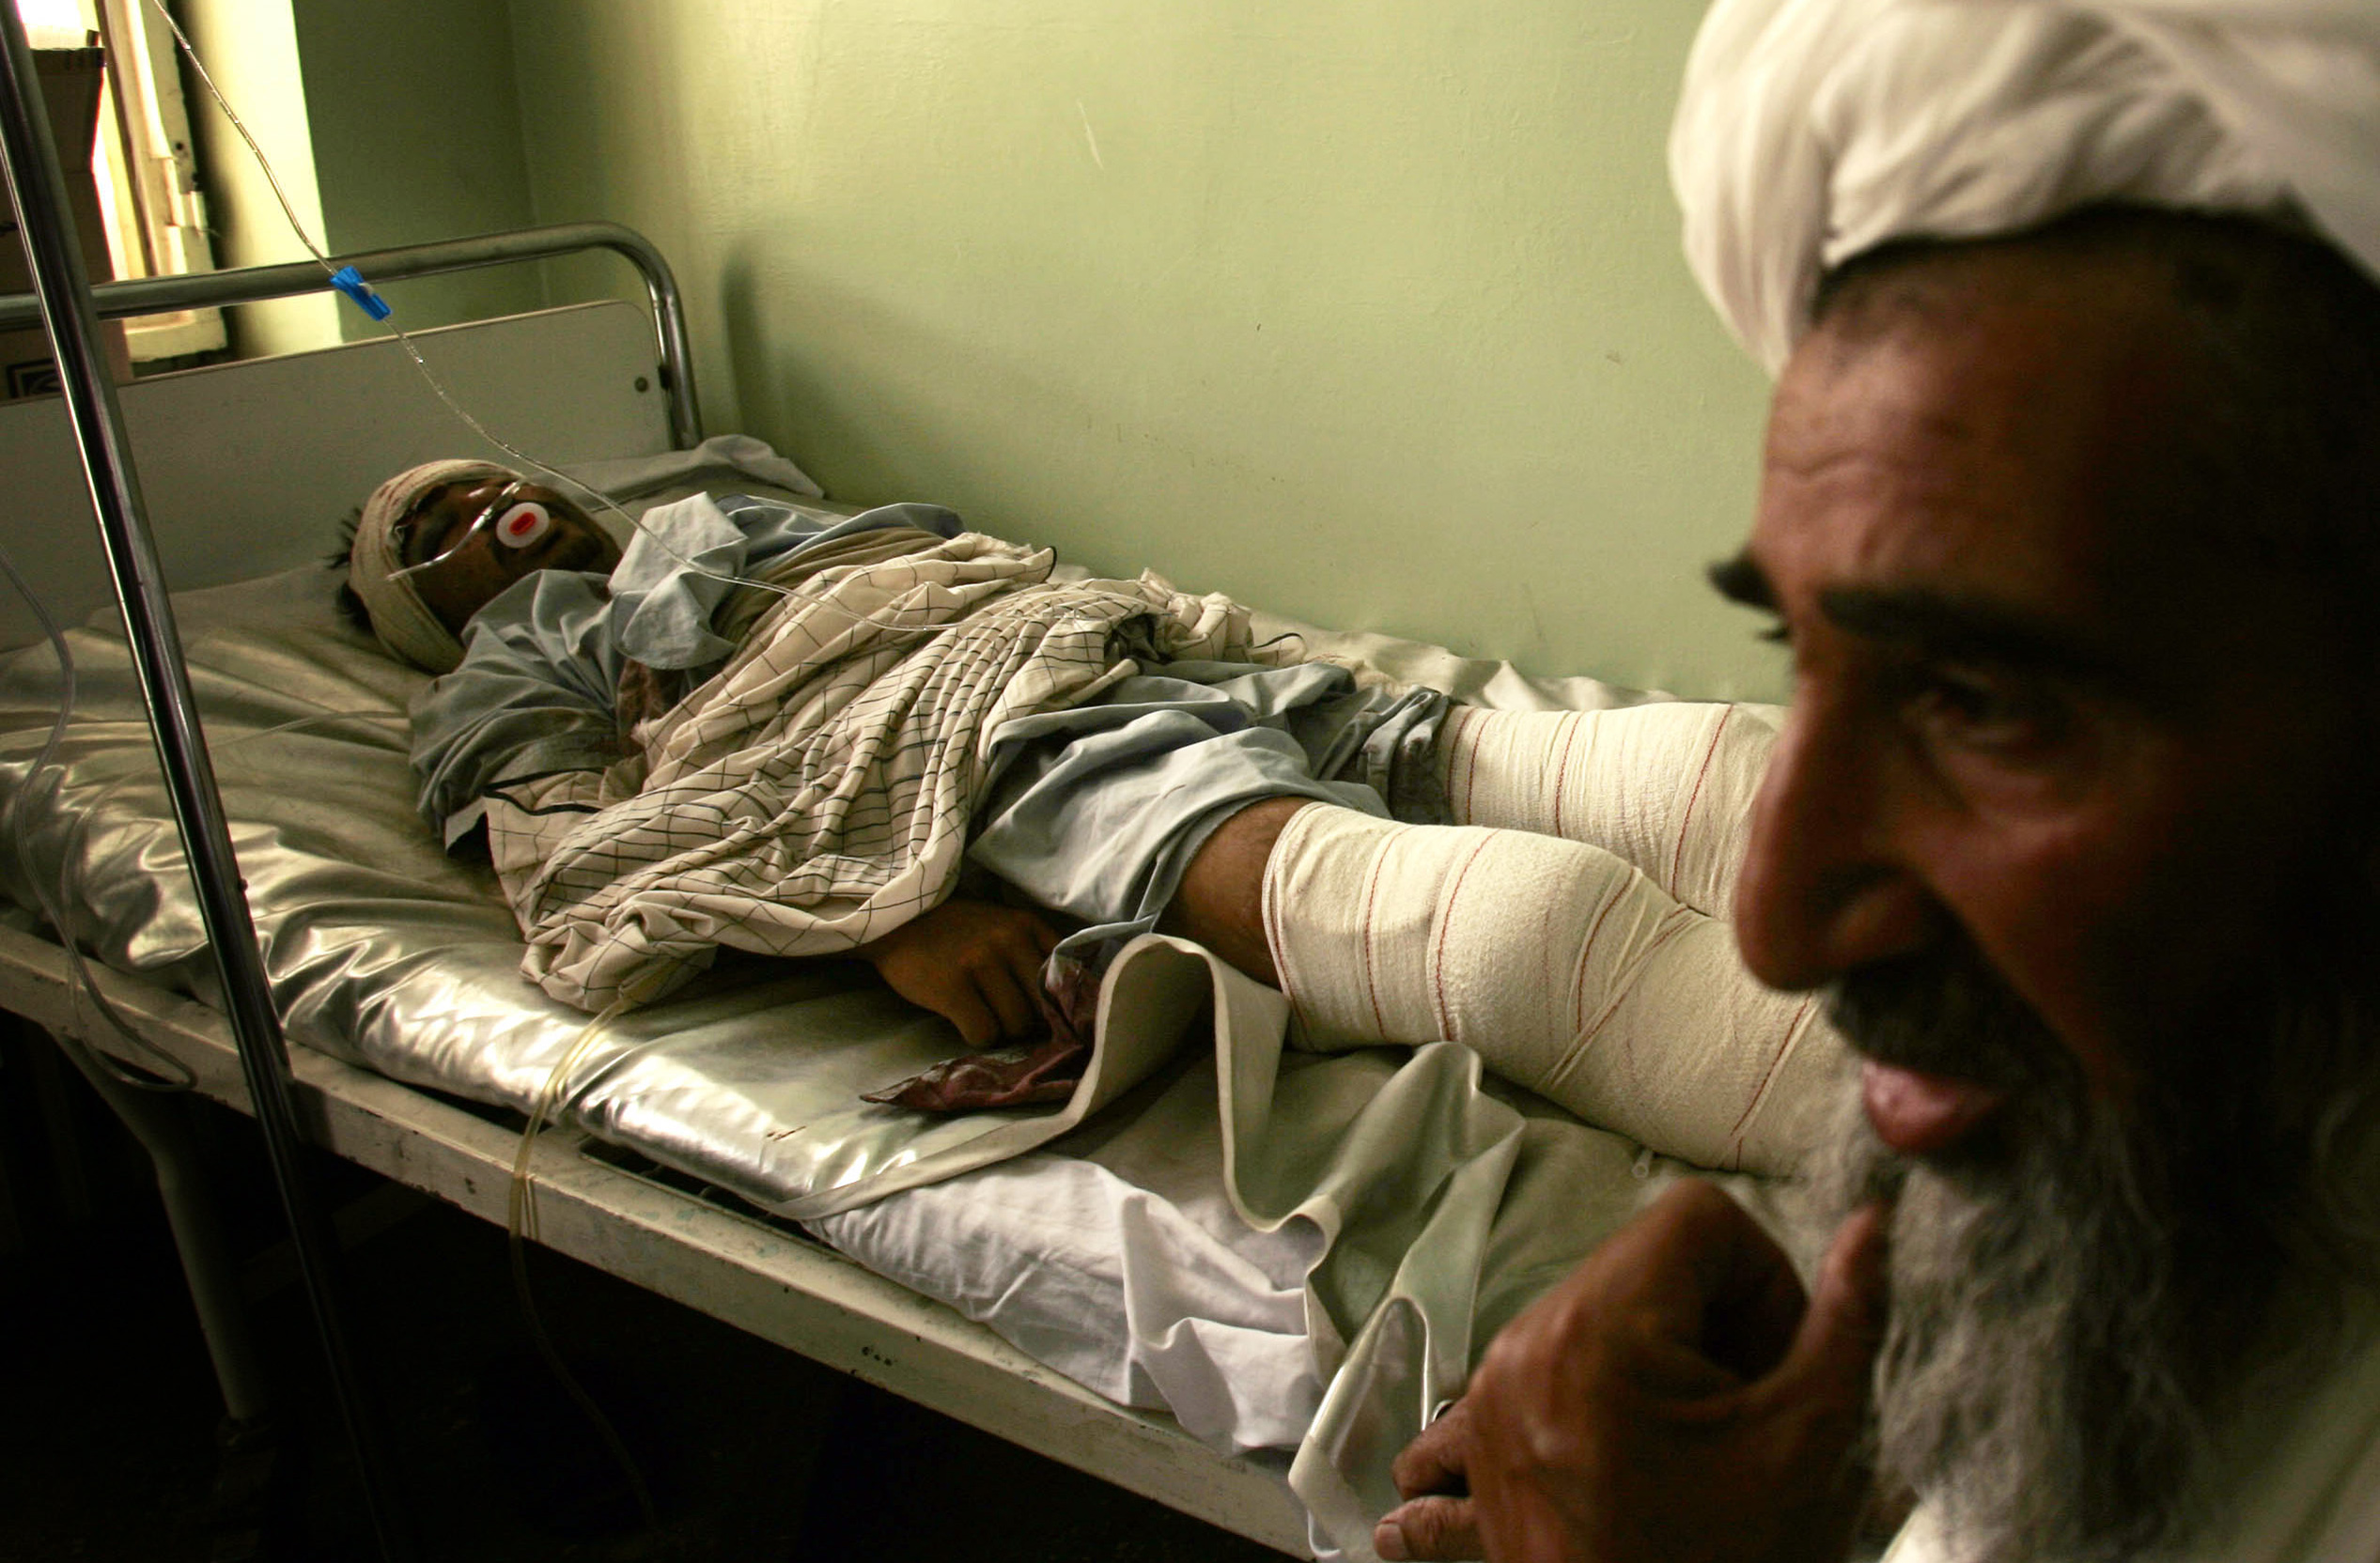 An Afghan man sits with his relative who was injured in a landmine explosion in Herat, west of Kabul, Afghanistan, Sunday, Aug. 22, 2010. Insurgents in Kandahar province, one of Afghanistan's most violent, killed the head of a private security company on Saturday, while one civilian was killed and five wounded by a land mine in Herat's Anjil district. (AP Photo/Reza Shirmohammadi)